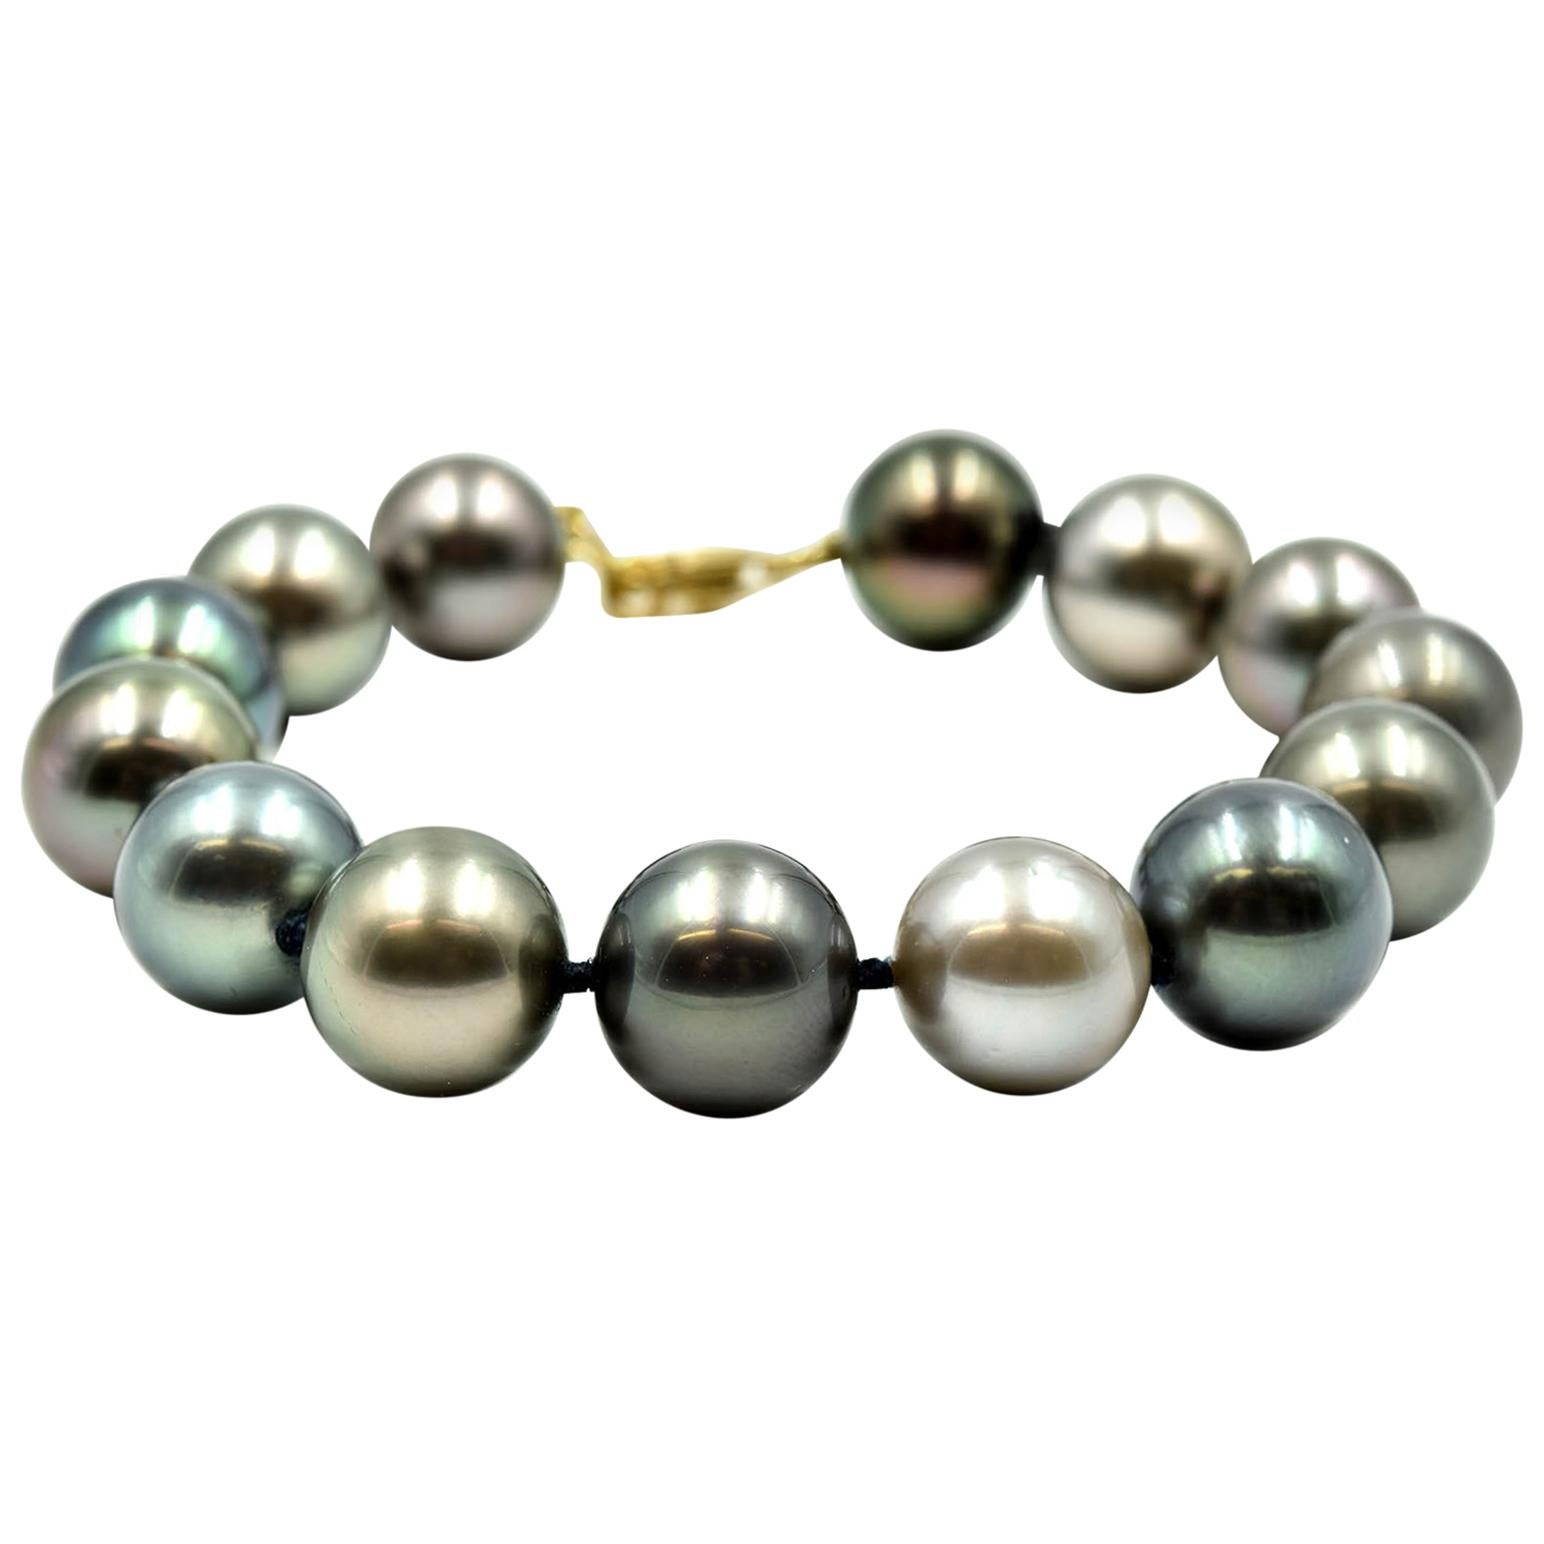 South Sea Tahitian Pearl Knotted Bracelet with 14 Karat Yellow Gold Clasp